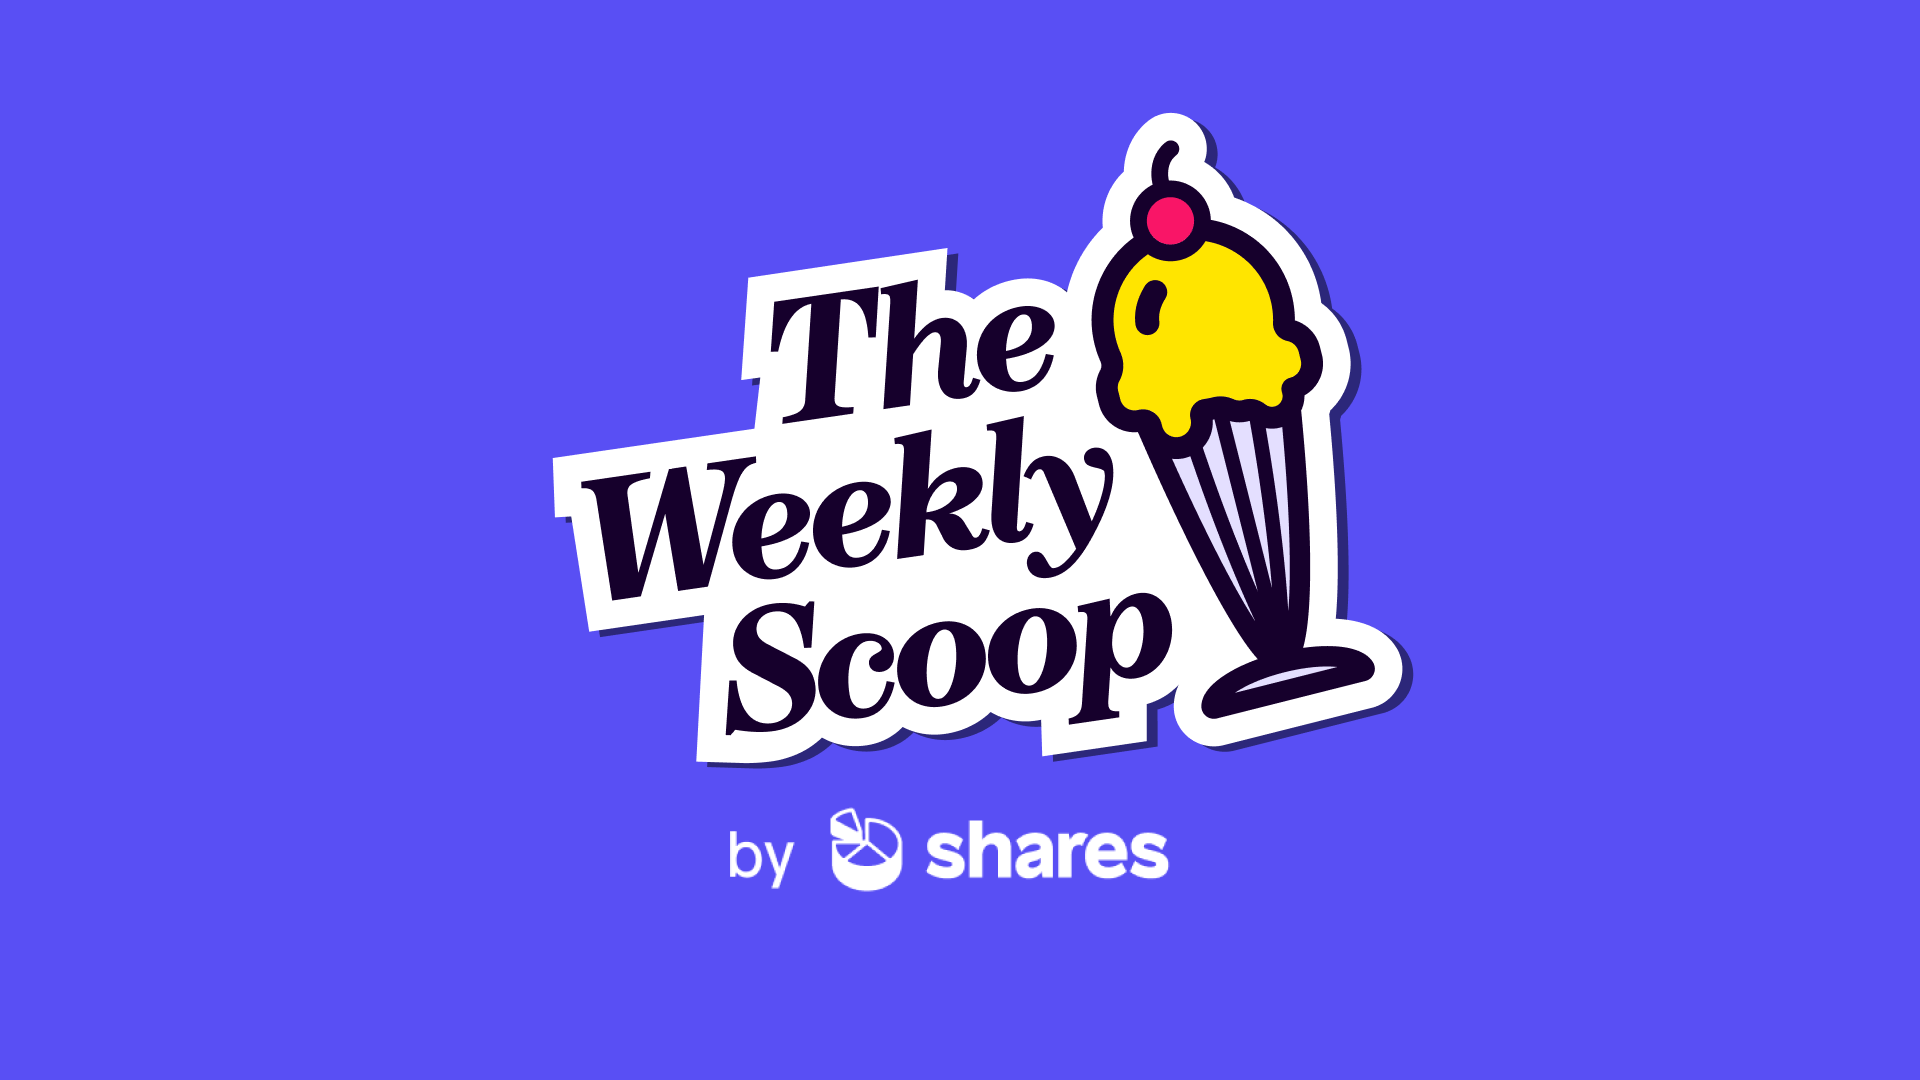 The Weekly Scoop newsletter, by Shares